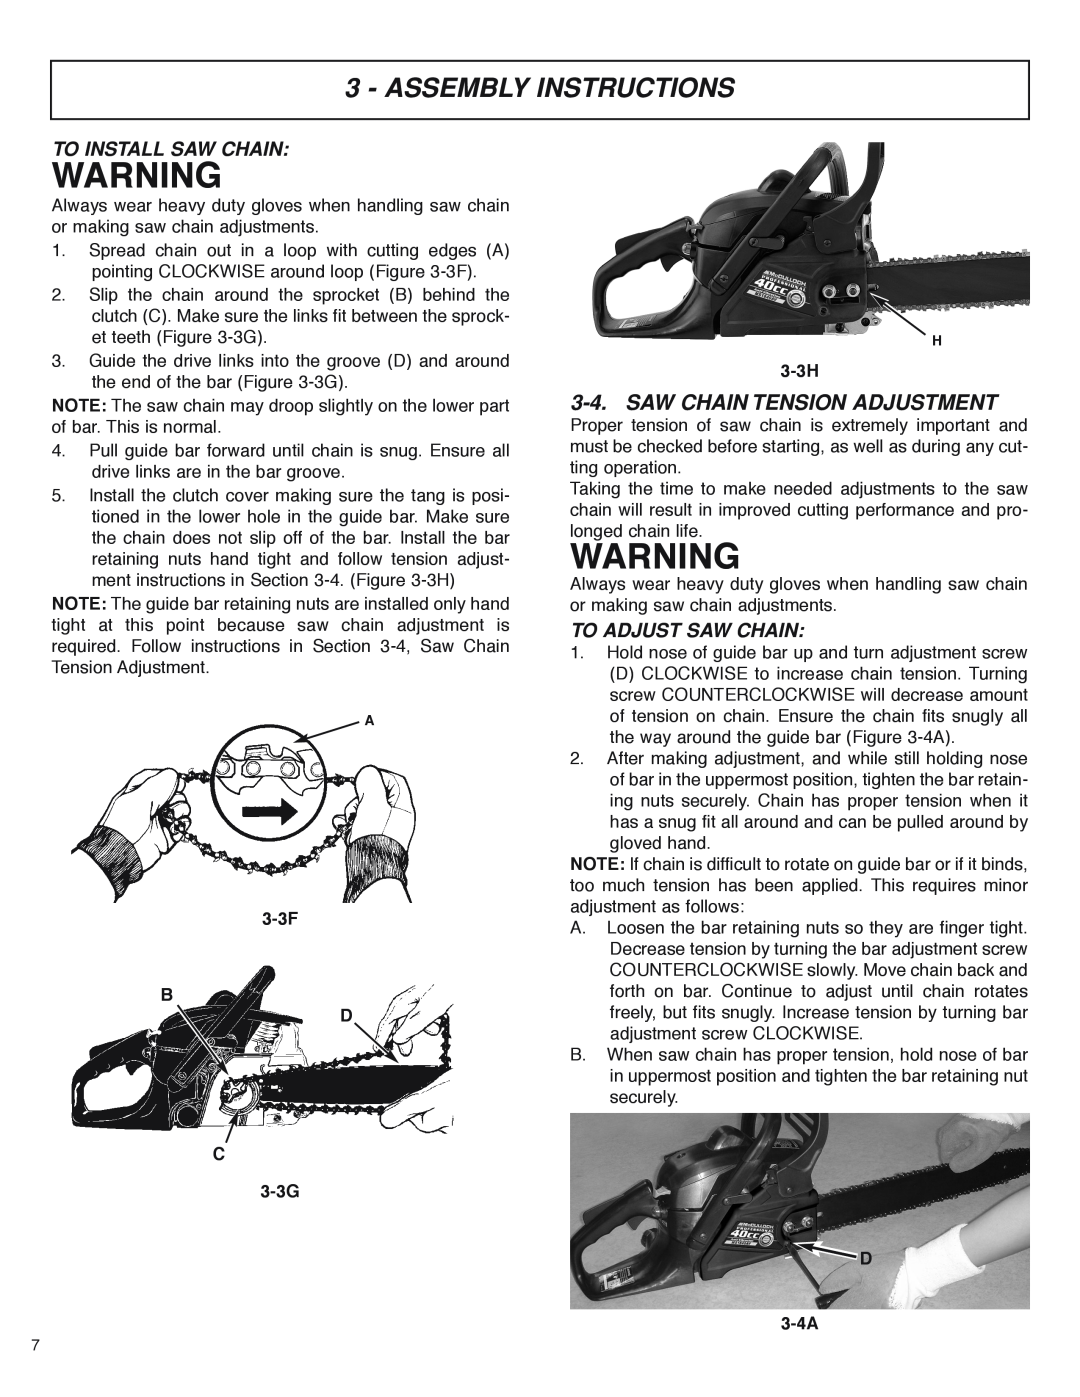 McCulloch MS4016PAVCC, MS4018PAVCC Saw Chain Tension Adjustment, To Install Saw Chain, To Adjust Saw Chain, 3-3H, D 3-4A 